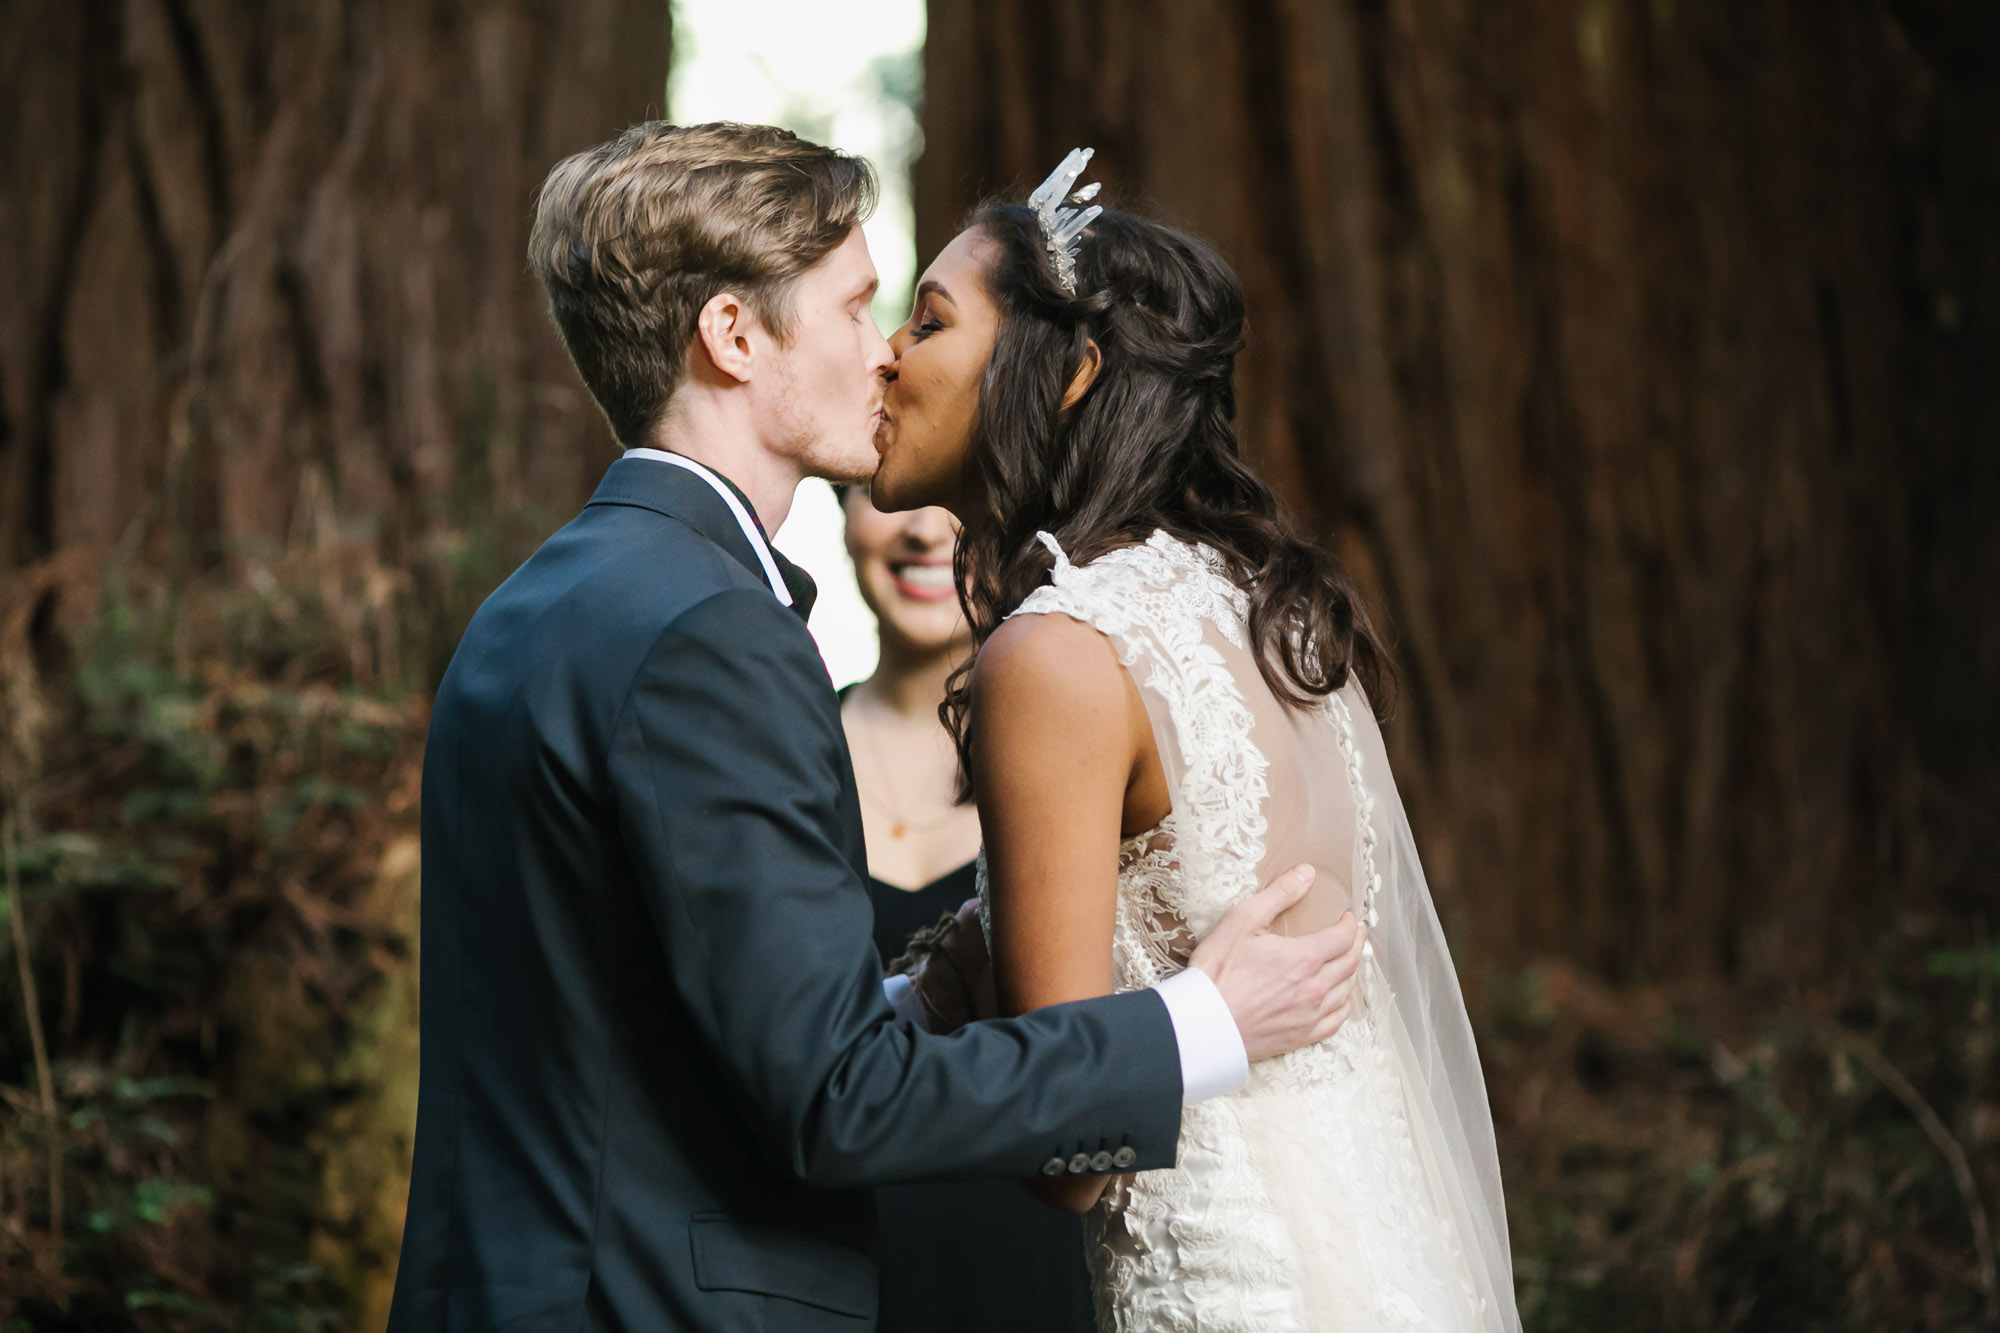 Bride and groom share their first kiss at their wedding ceremony